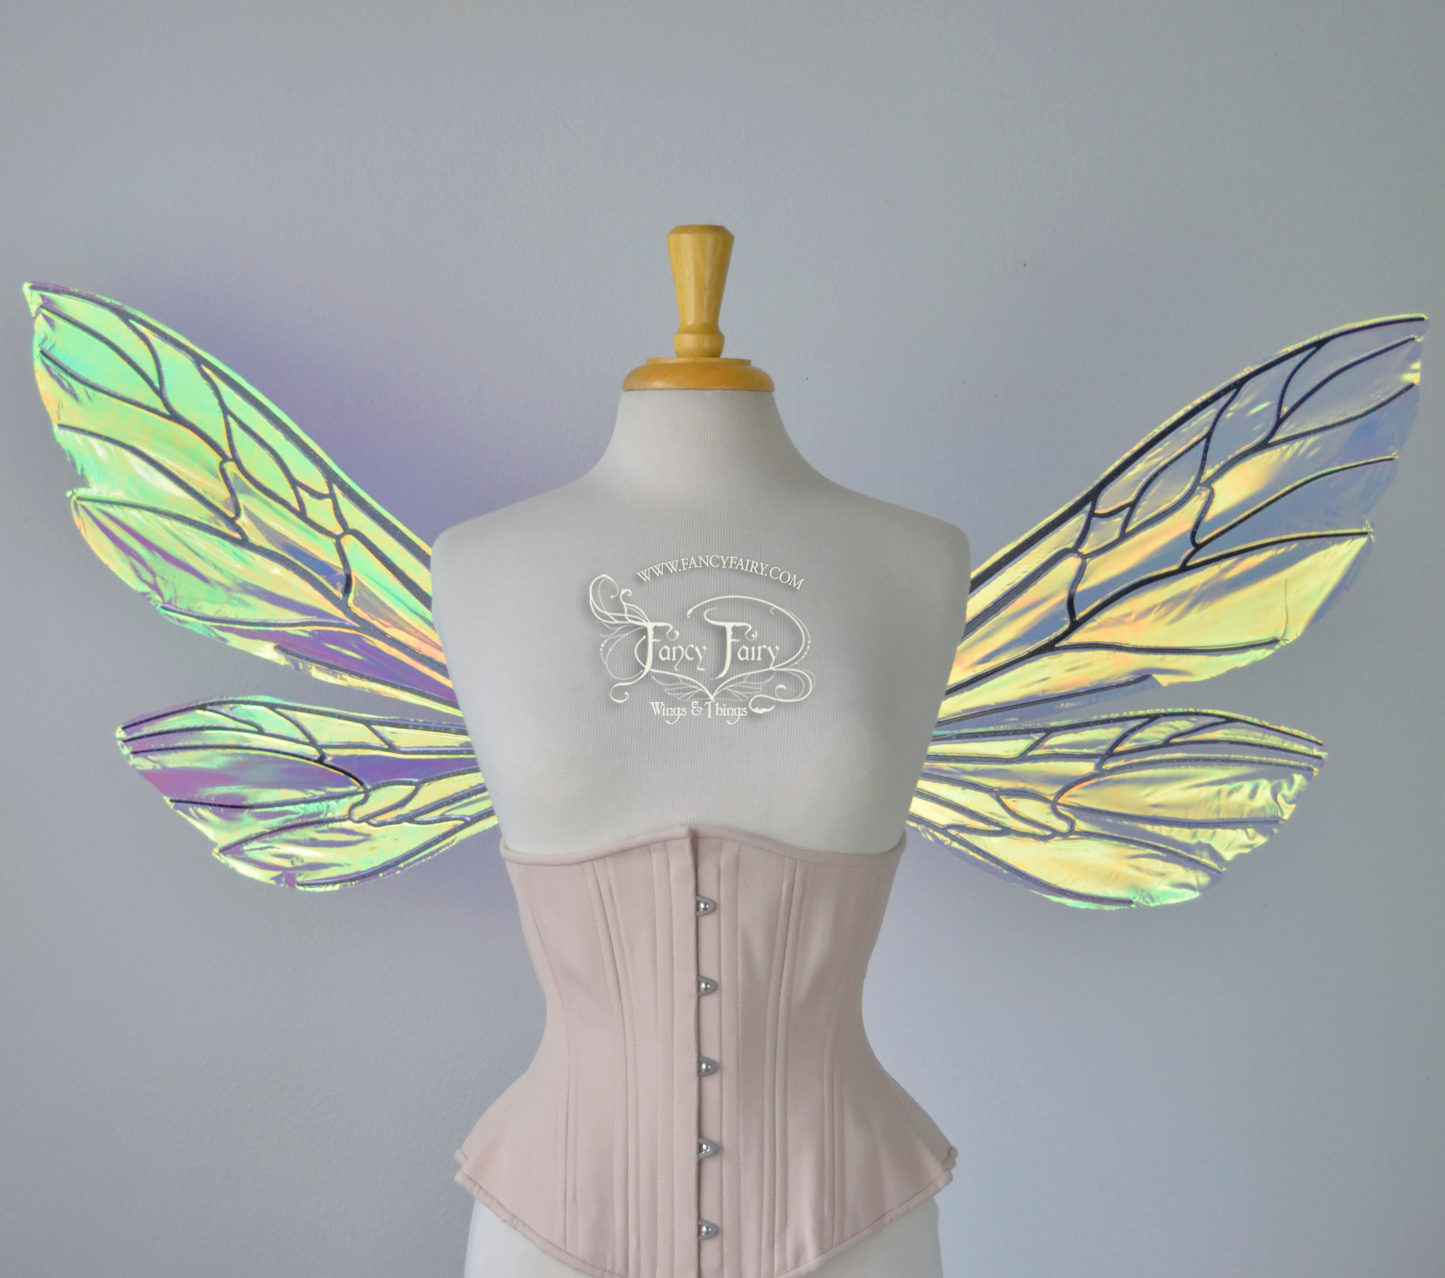 Ellette Convertible Iridescent Fairy Wings in Clear Diamond Fire with black veins